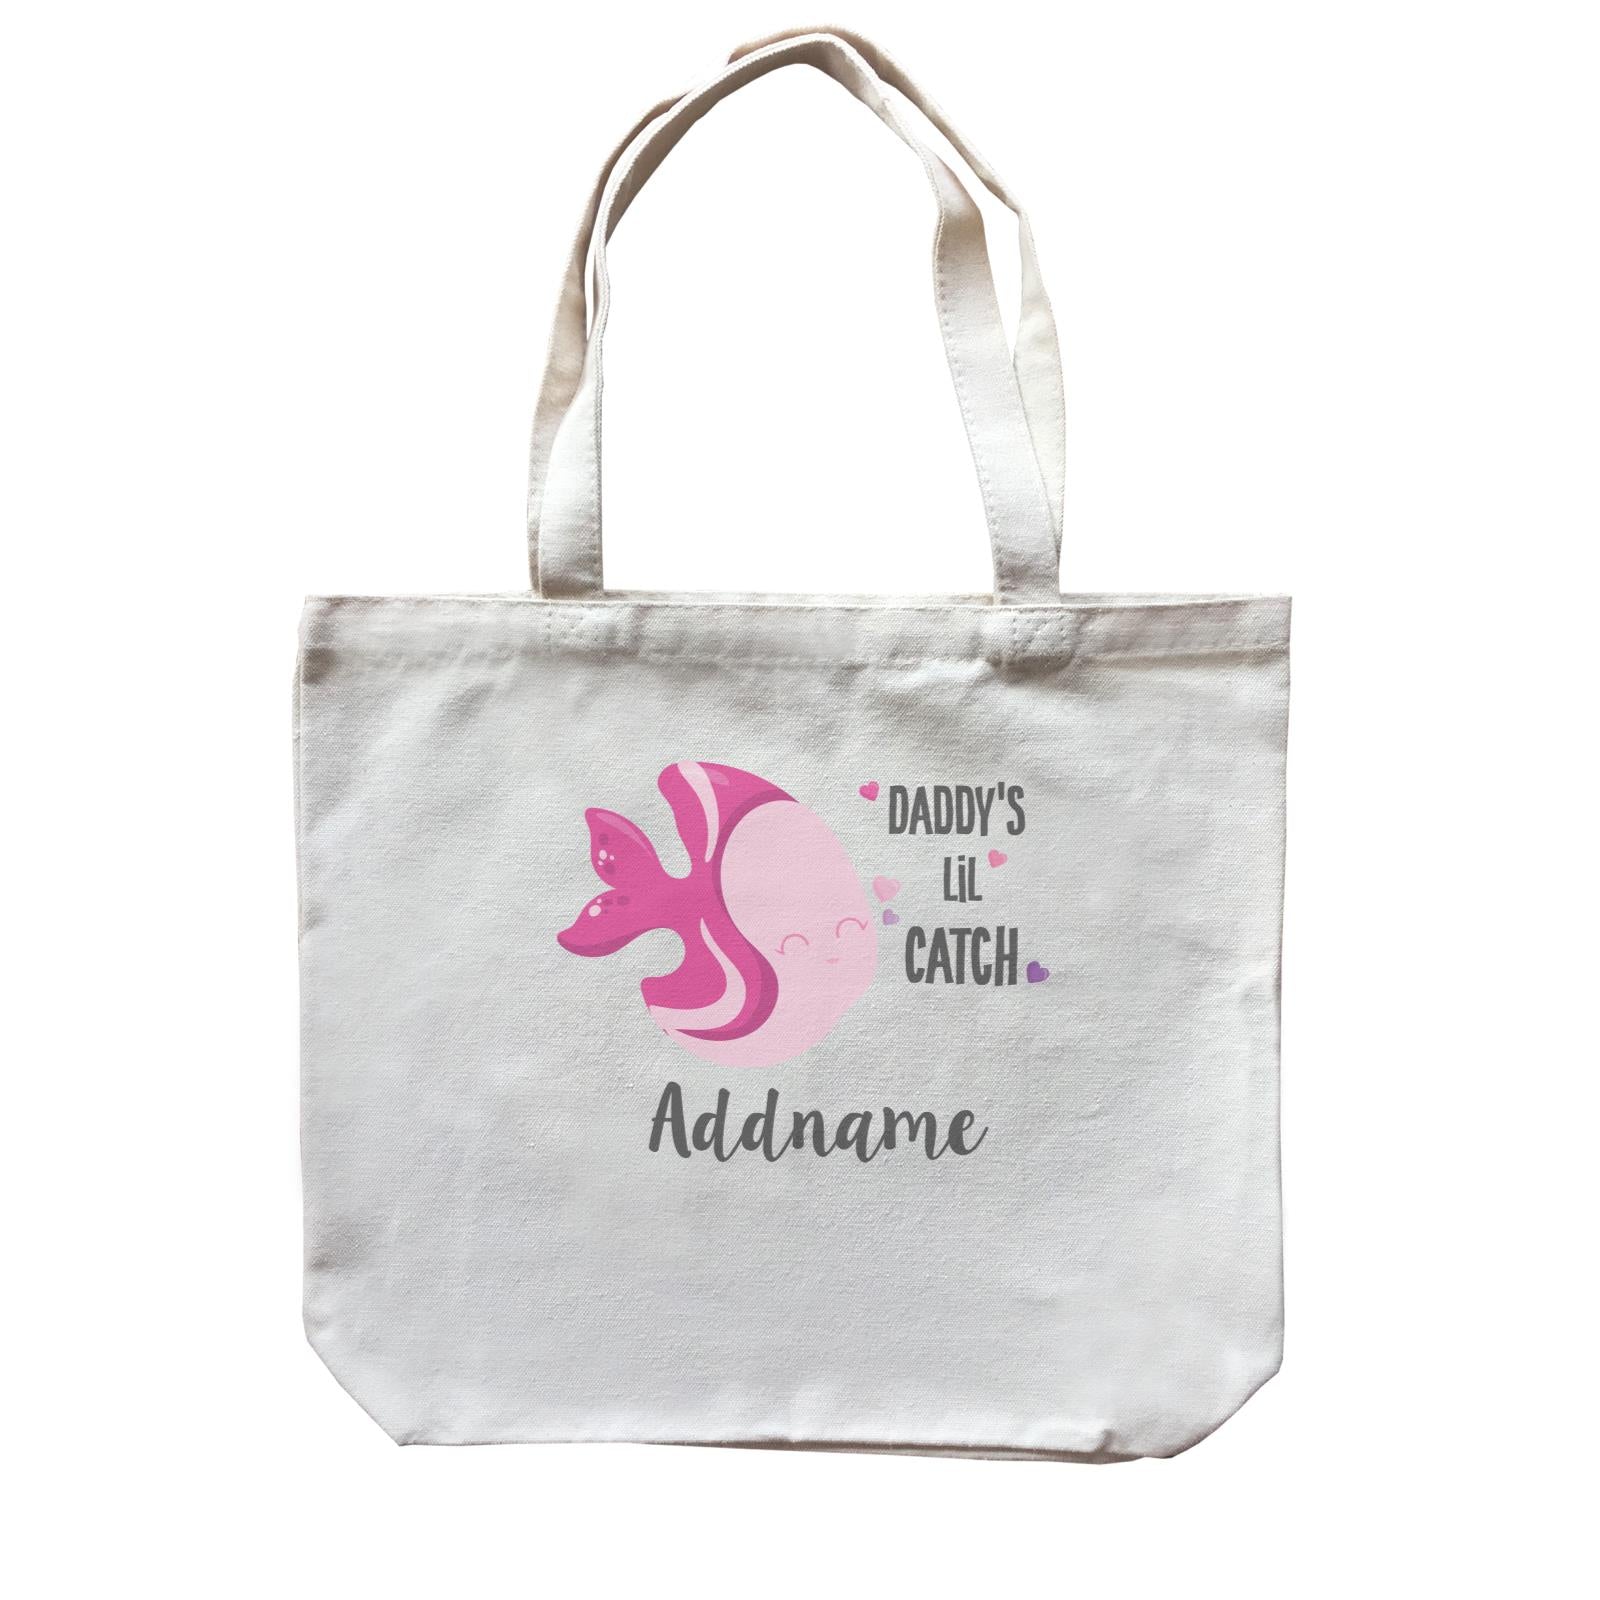 Cute Sea Animals Pink Fish Daddy's Lil Catch Addname Canvas Bag